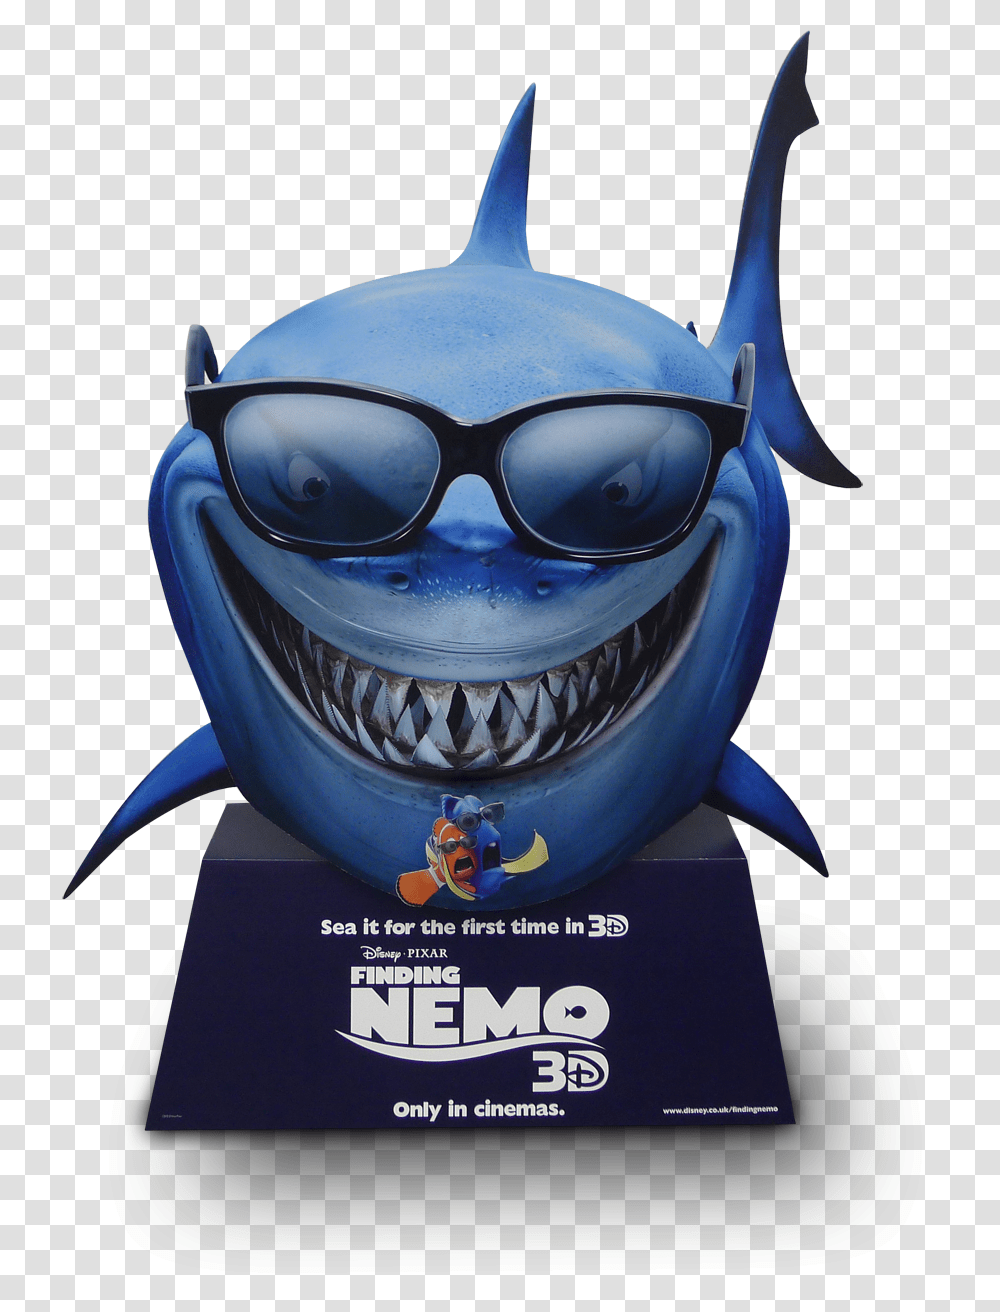 Front View The Body Of The Great White Shark Is Finding Nemo Poster 2003, Sunglasses, Advertisement, Goggles Transparent Png